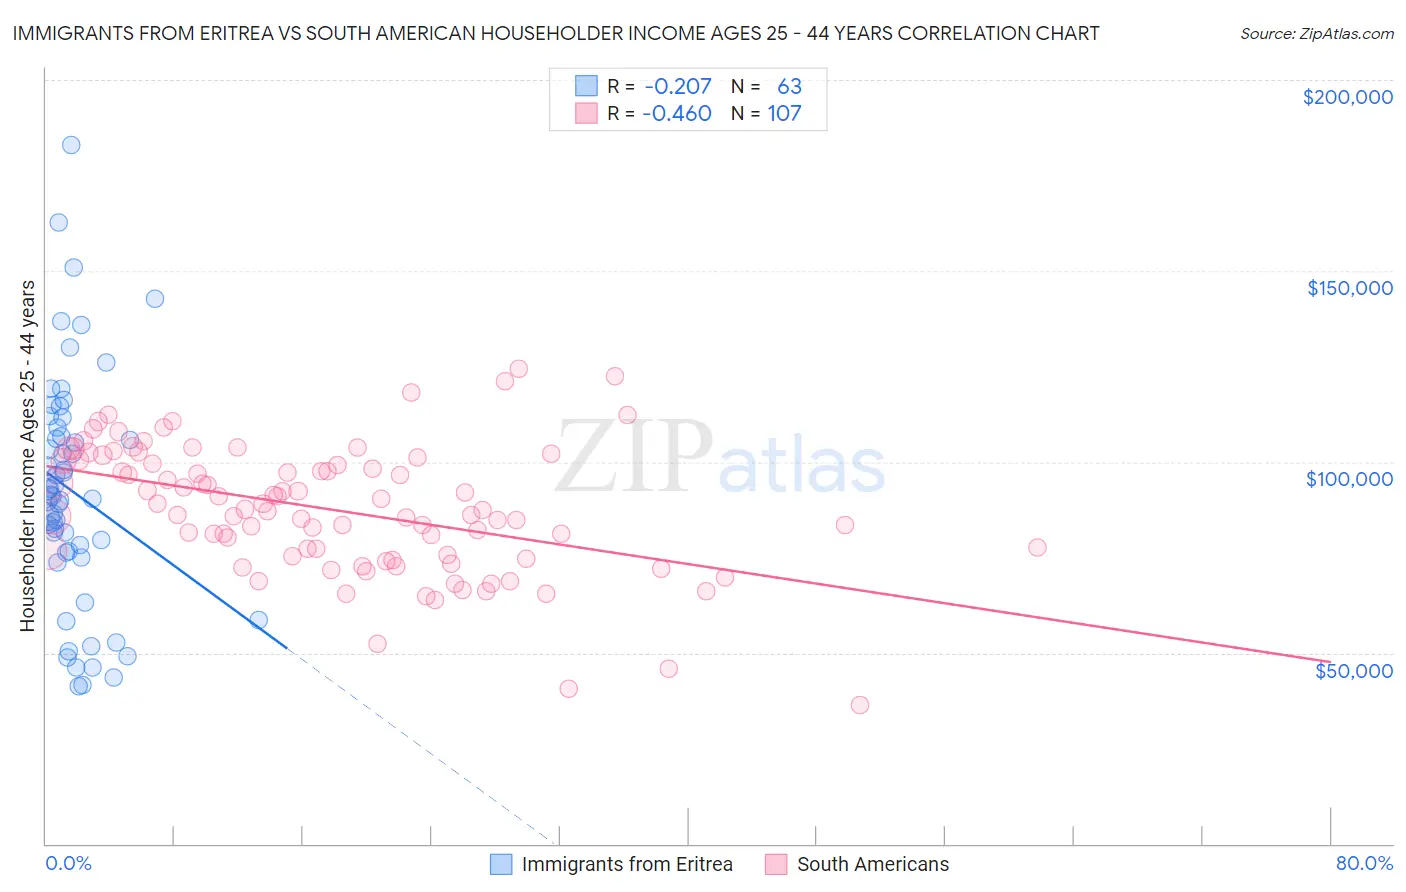 Immigrants from Eritrea vs South American Householder Income Ages 25 - 44 years